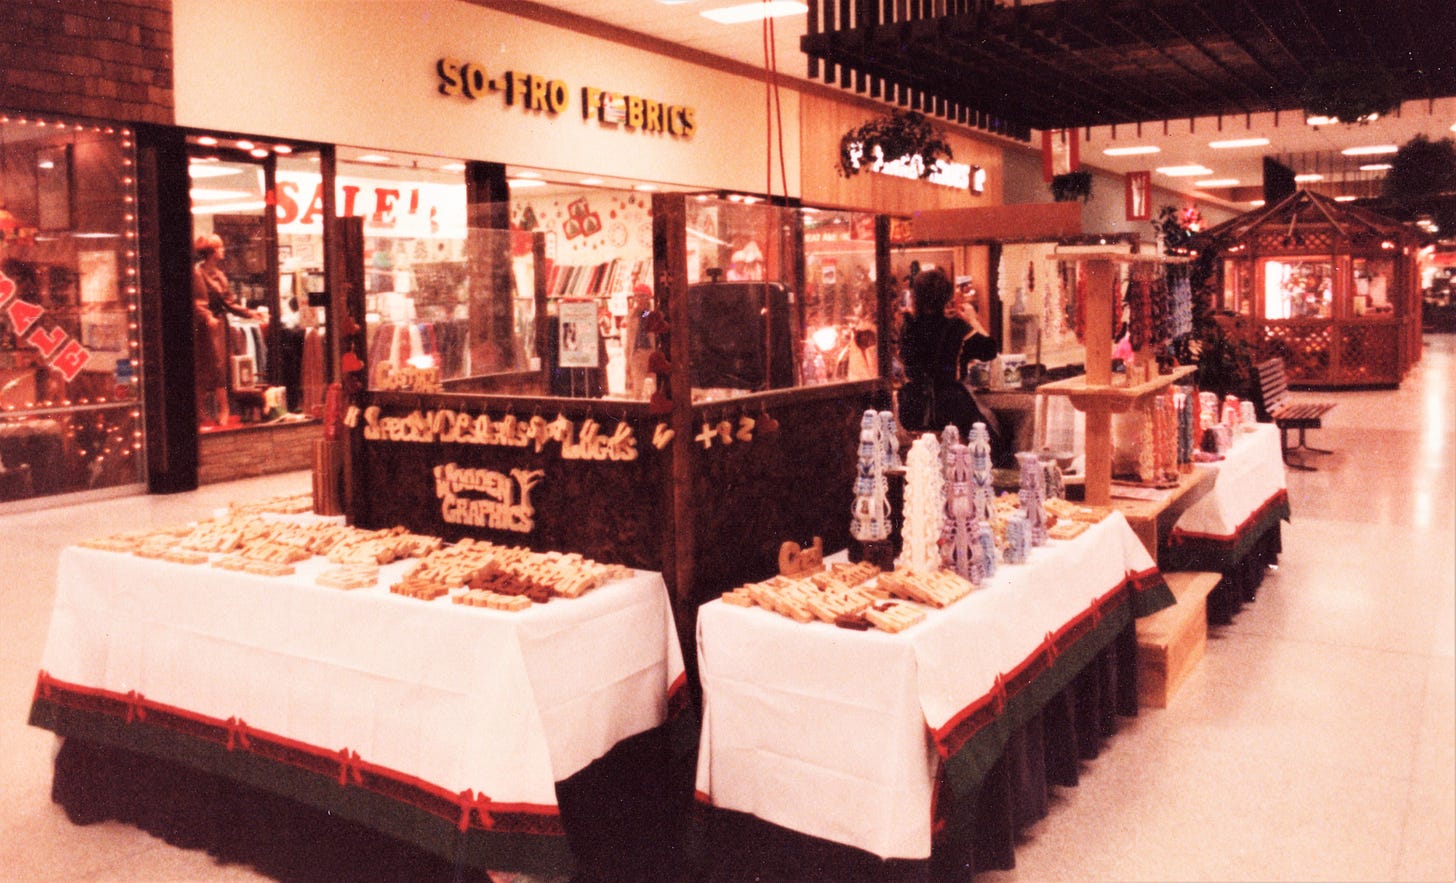 View of our traveling mall kiosk, circa 1984.